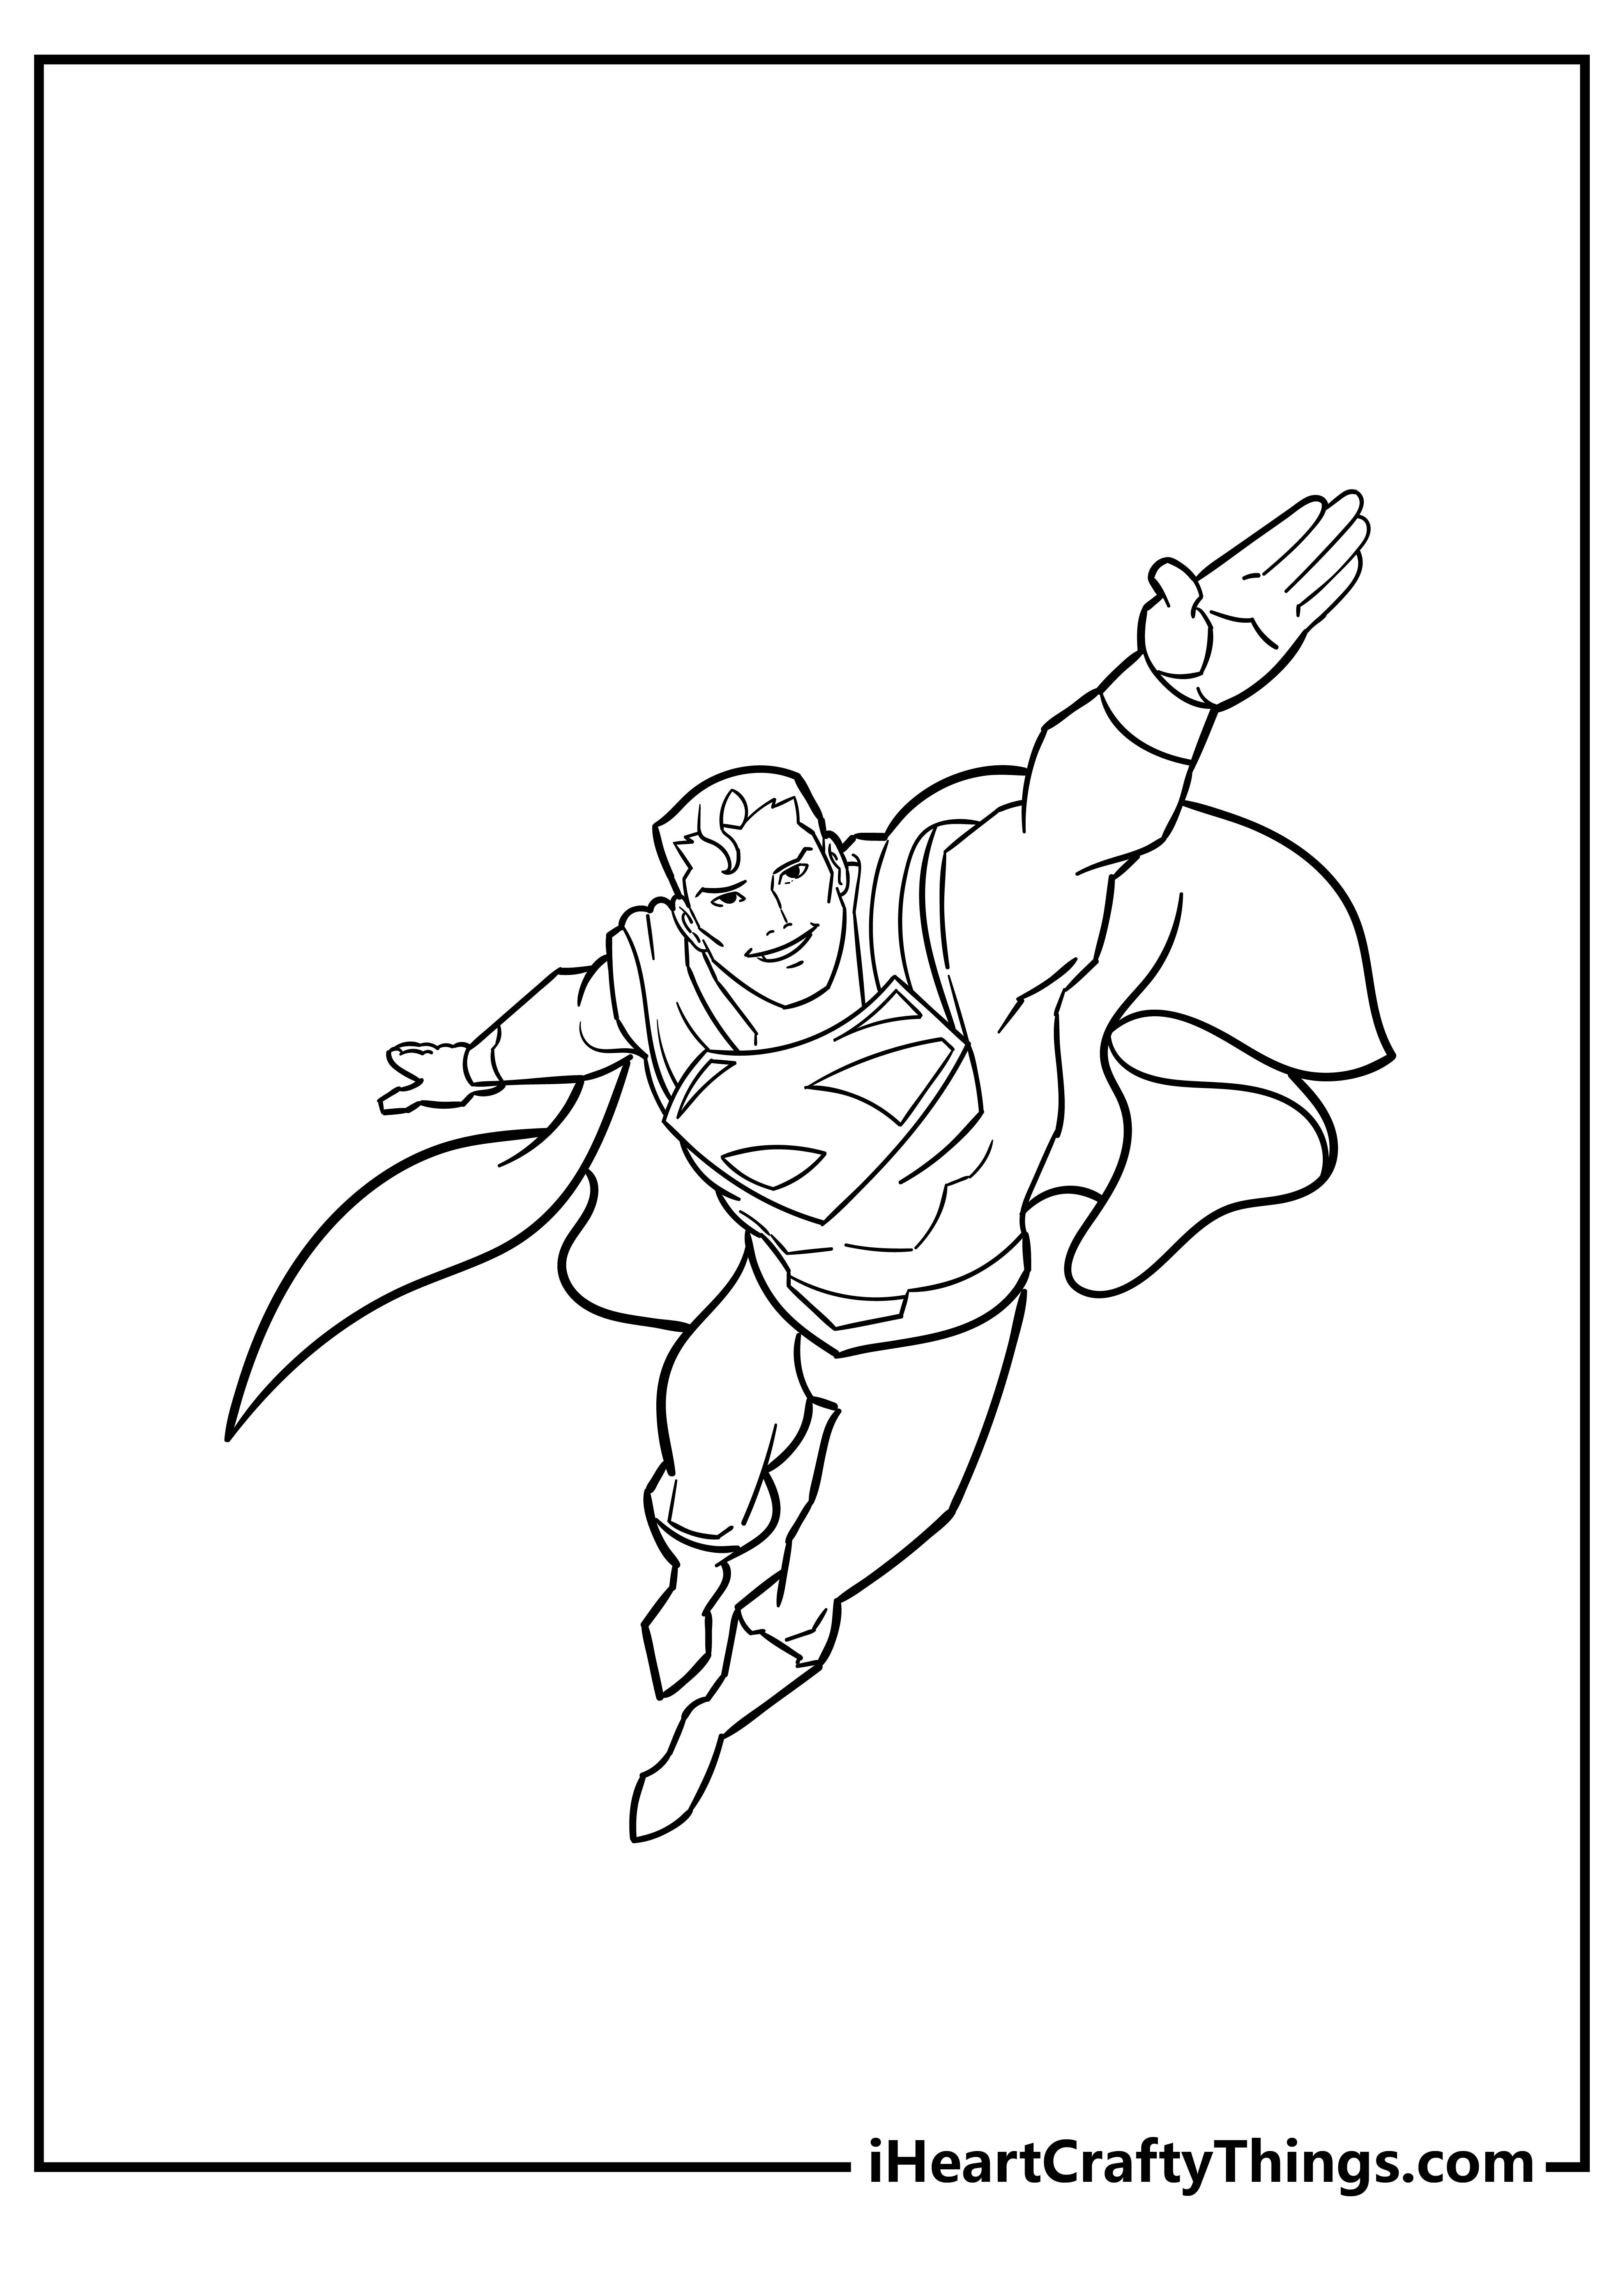 Superman Coloring Book for adults free download